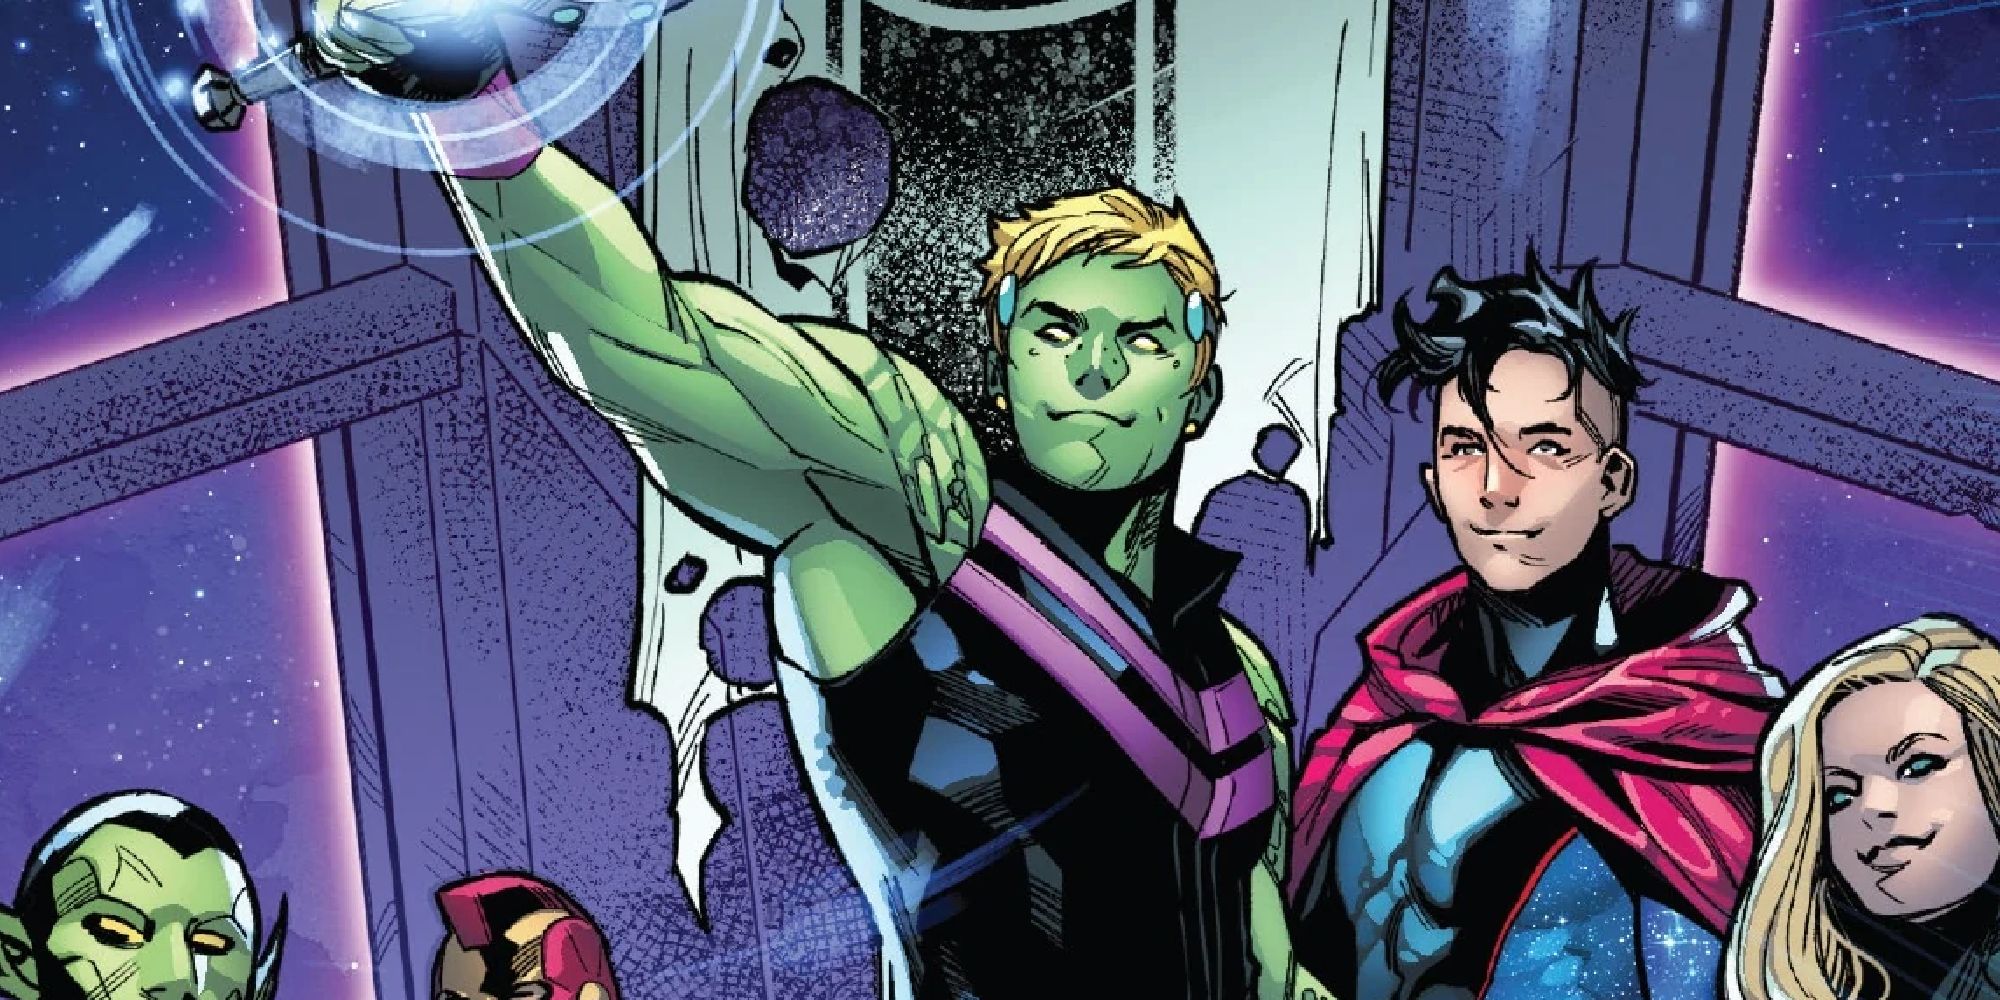 Hulkling standing with Wiccan in the comics